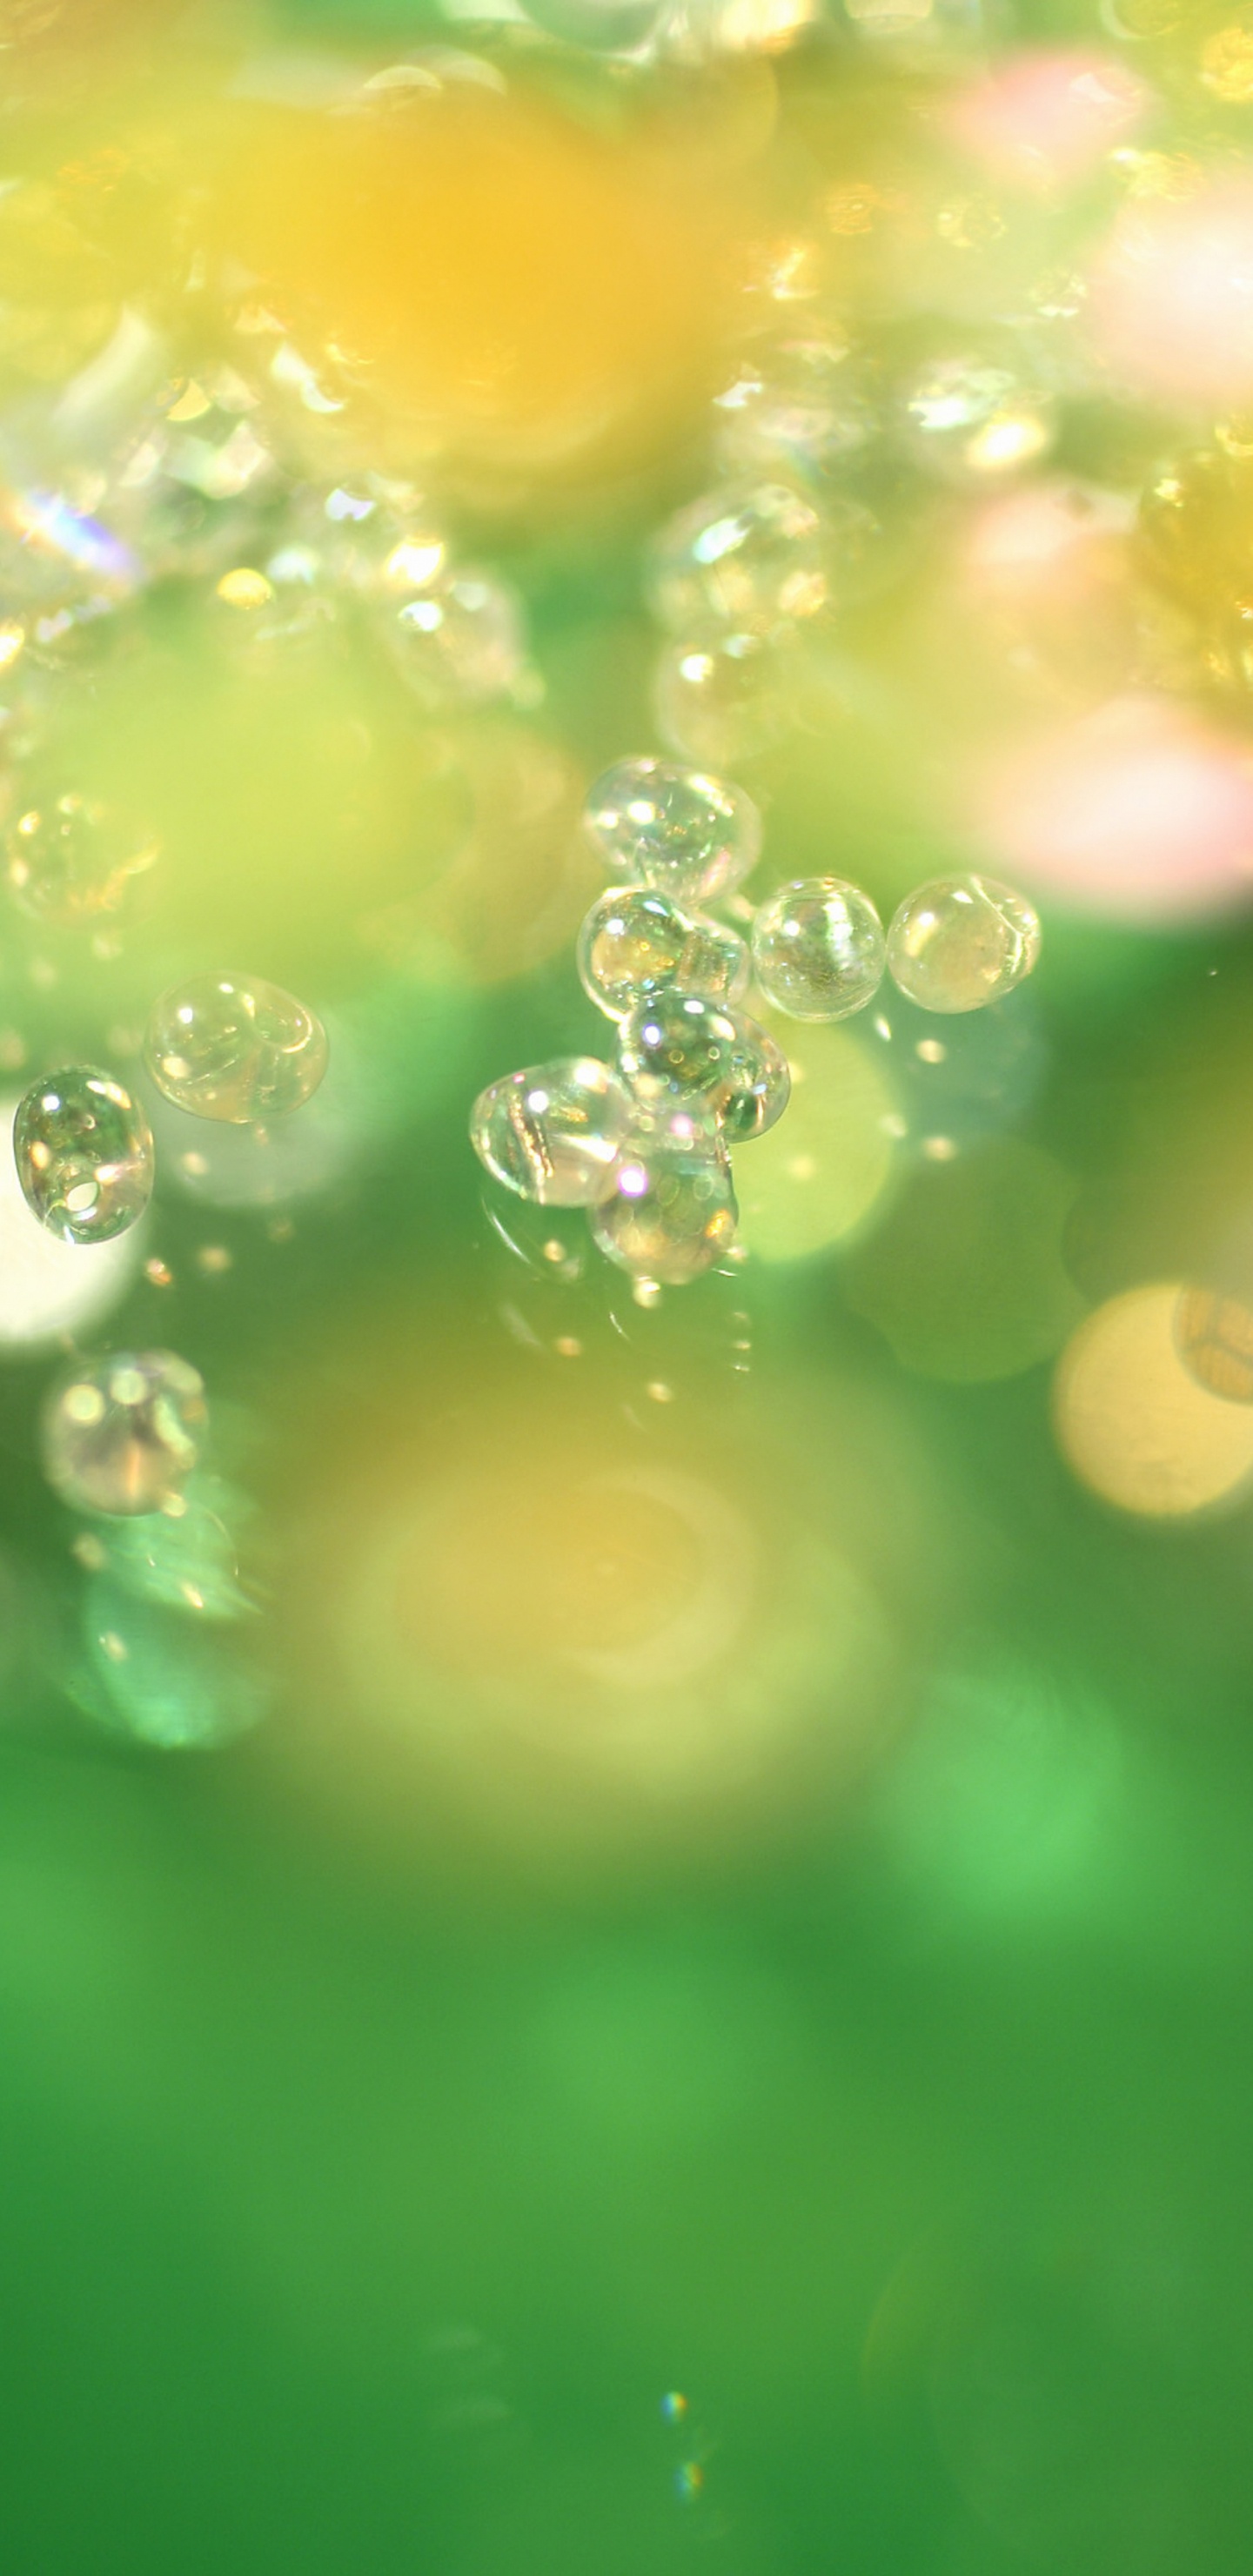 Water Droplets on Green Surface. Wallpaper in 1440x2960 Resolution